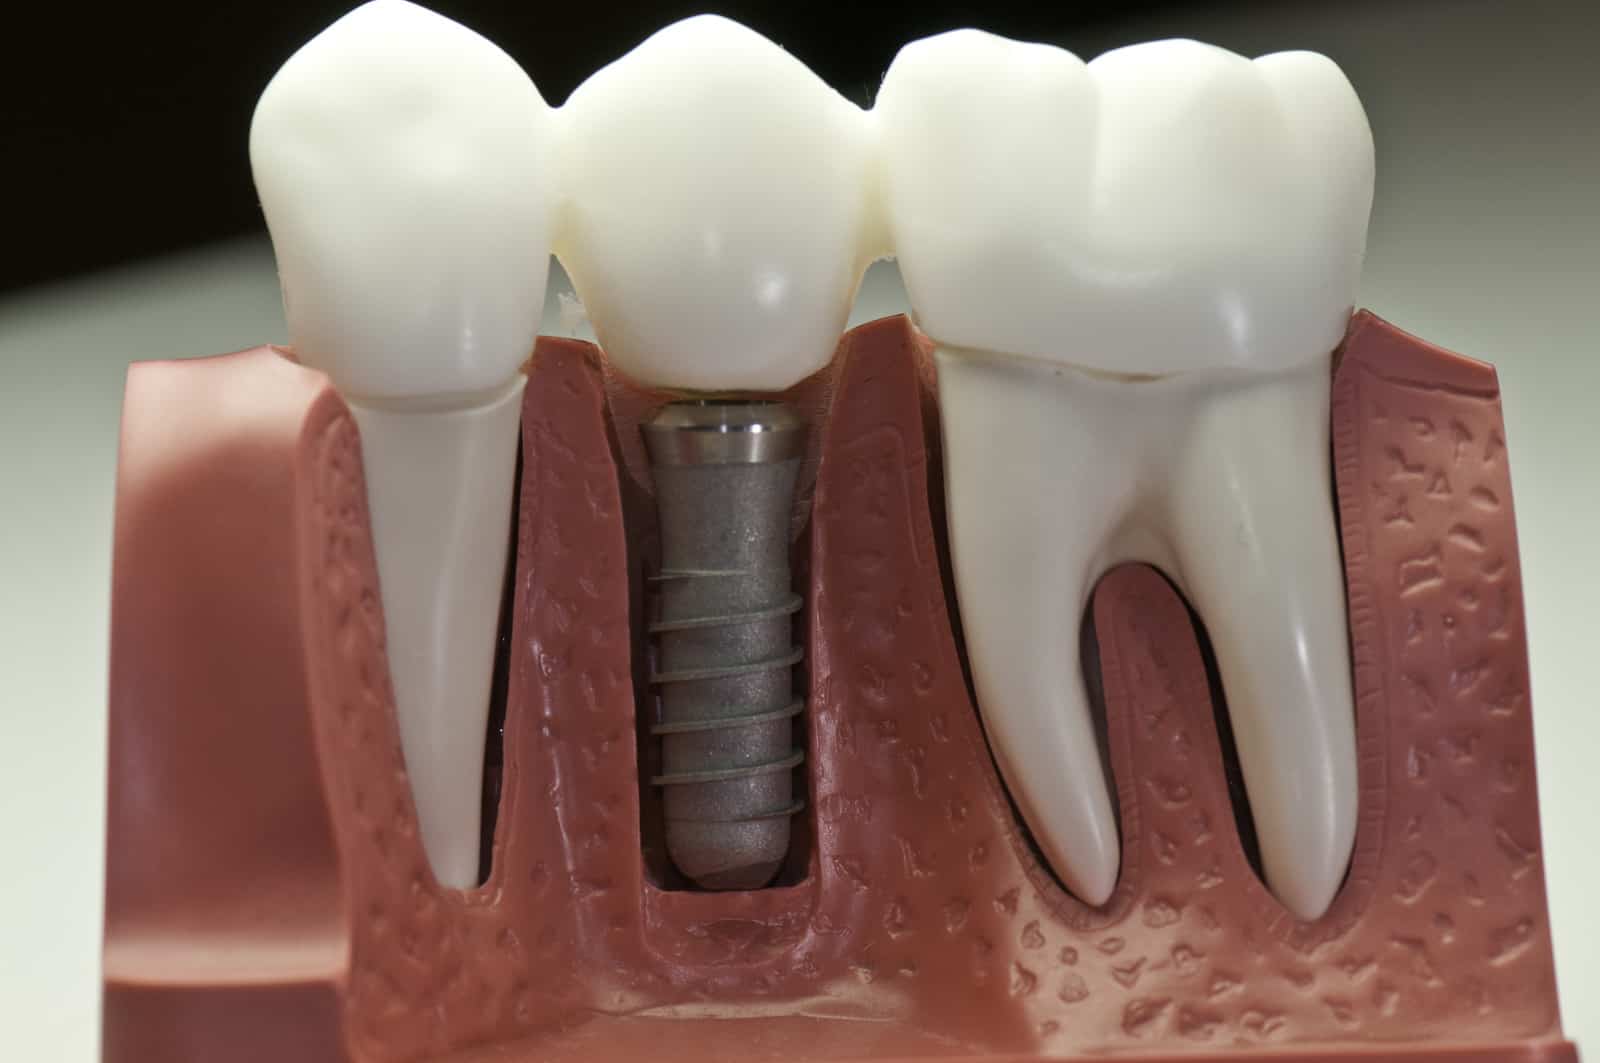 when can i eat after dental implant surgery?